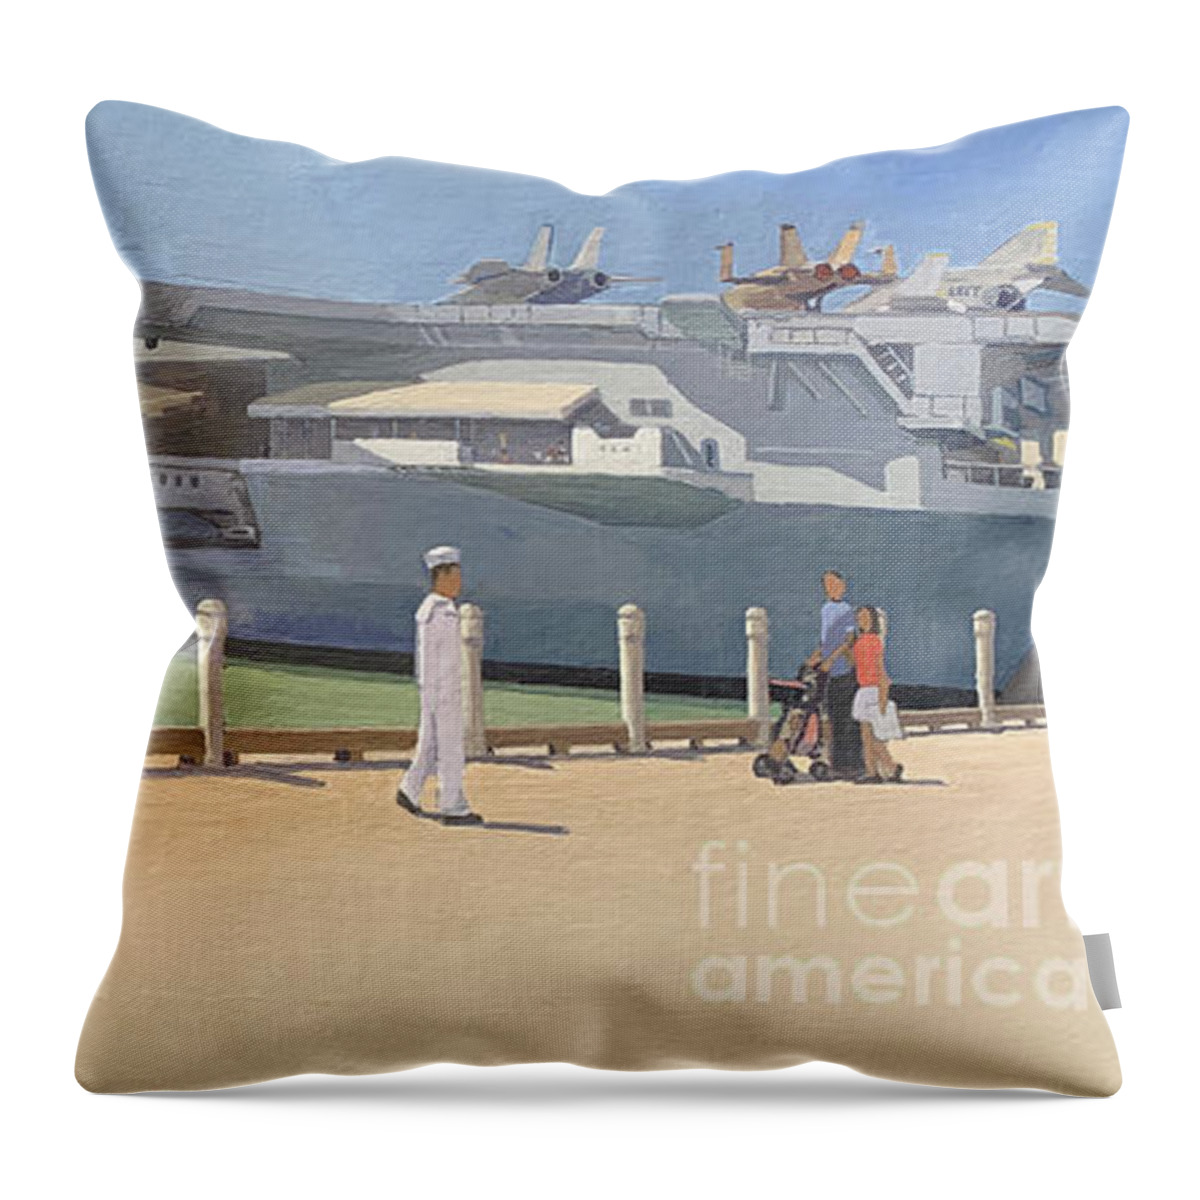 Uss Midway Throw Pillow featuring the painting USS Midway San Diego California by Paul Strahm